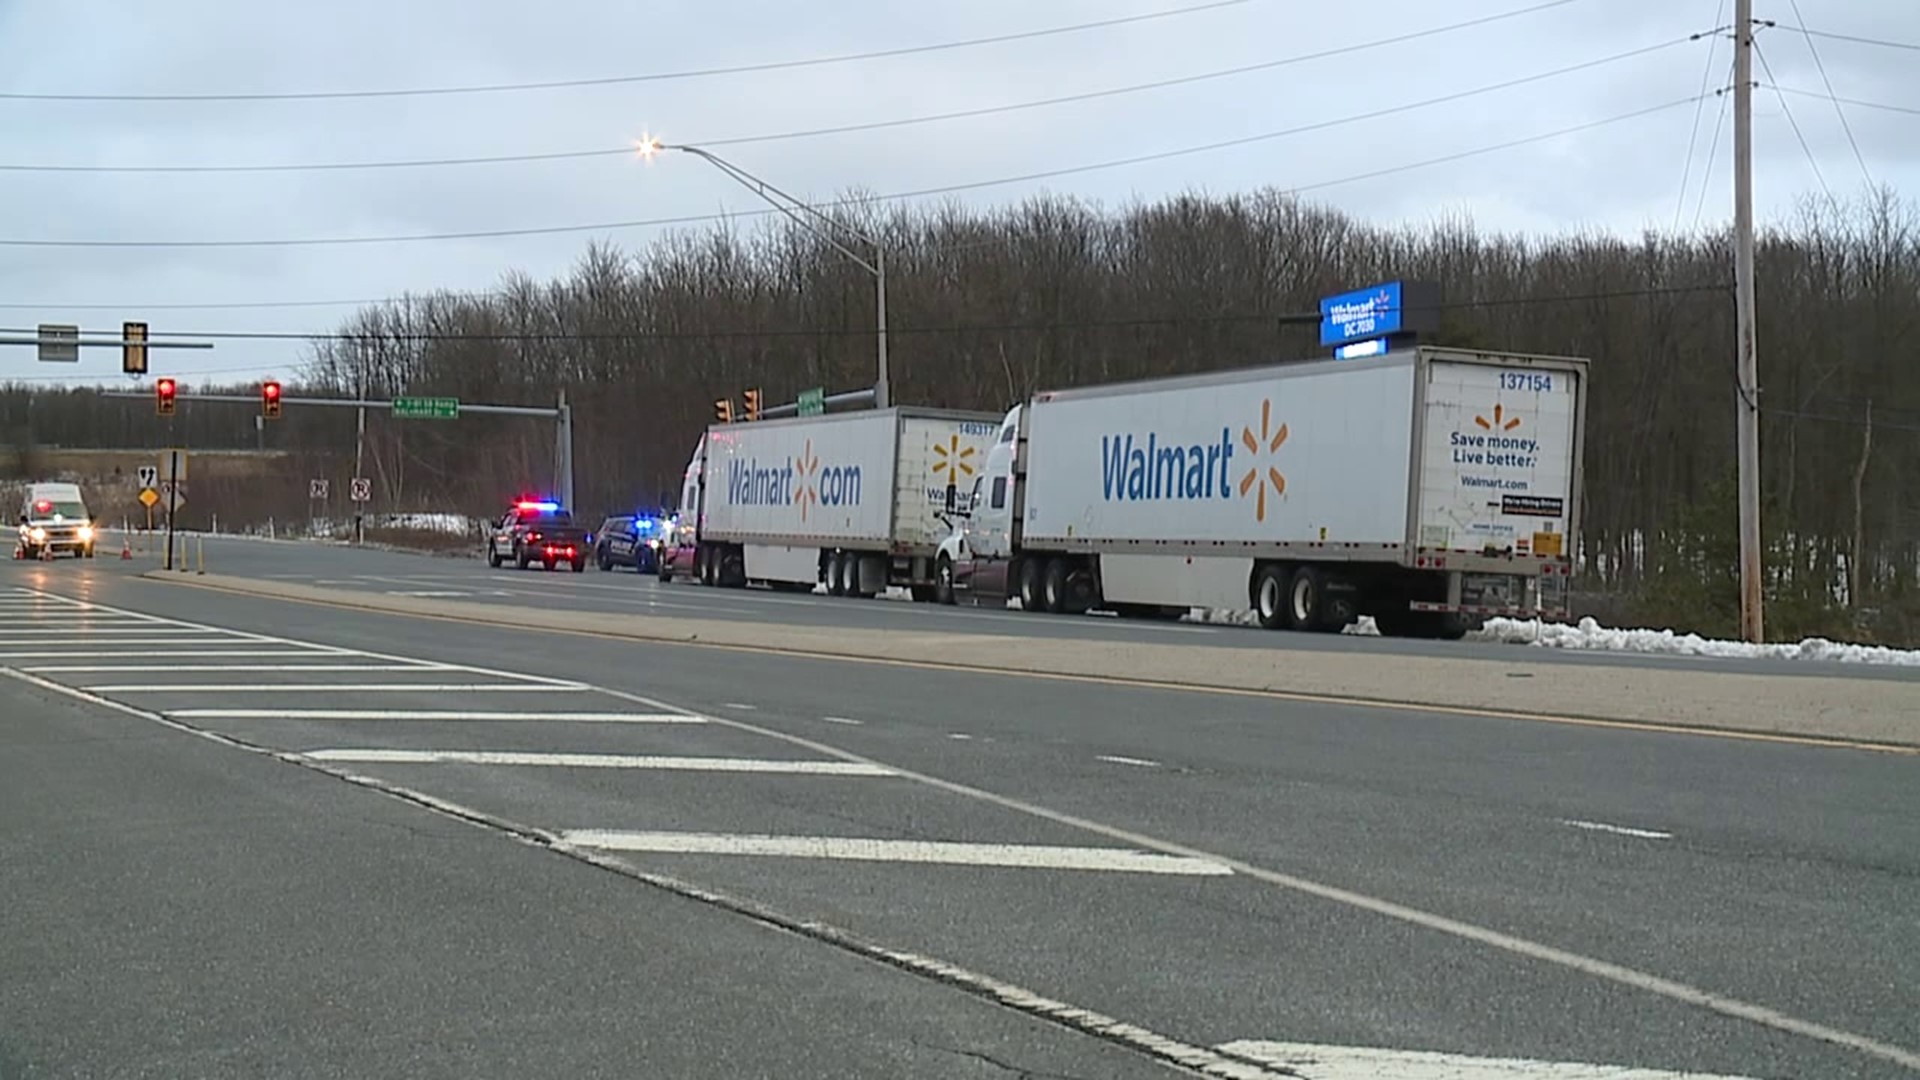 Crews responded to an ammonia spill Wednesday afternoon at a Walmart Distribution Center in Butler Township near Pottsville, according to police.